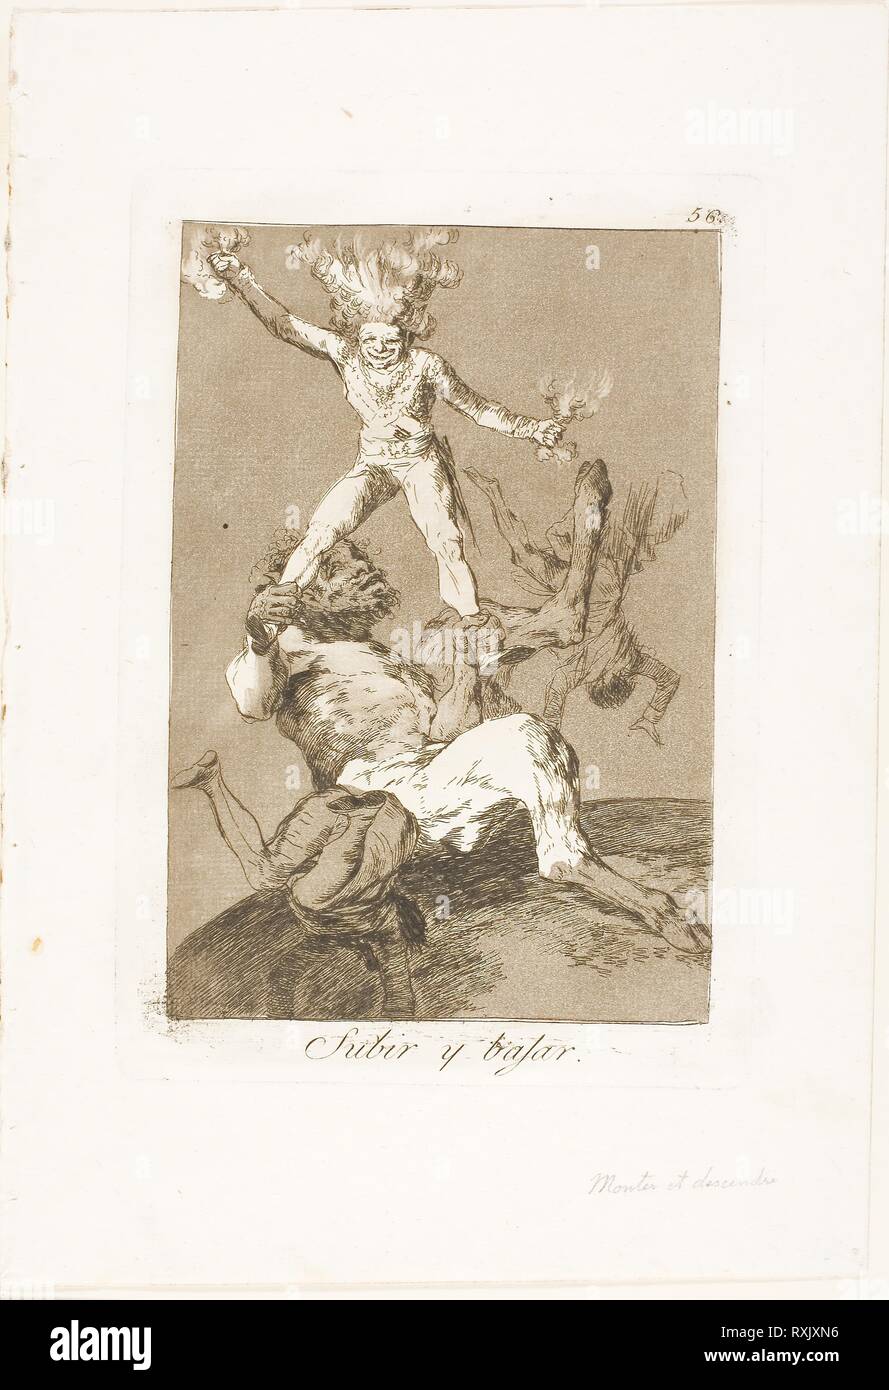 To Rise and to Fall, plate 56 from Los Caprichos. Francisco José de Goya y Lucientes; Spanish, 1746-1828. Date: 1797-1799. Dimensions: 188 x 128 mm (image); 215 x 150 mm (plate); 301 x 207 mm (sheet). Etching and aquatint on ivory laid paper. Origin: Spain. Museum: The Chicago Art Institute. Stock Photo